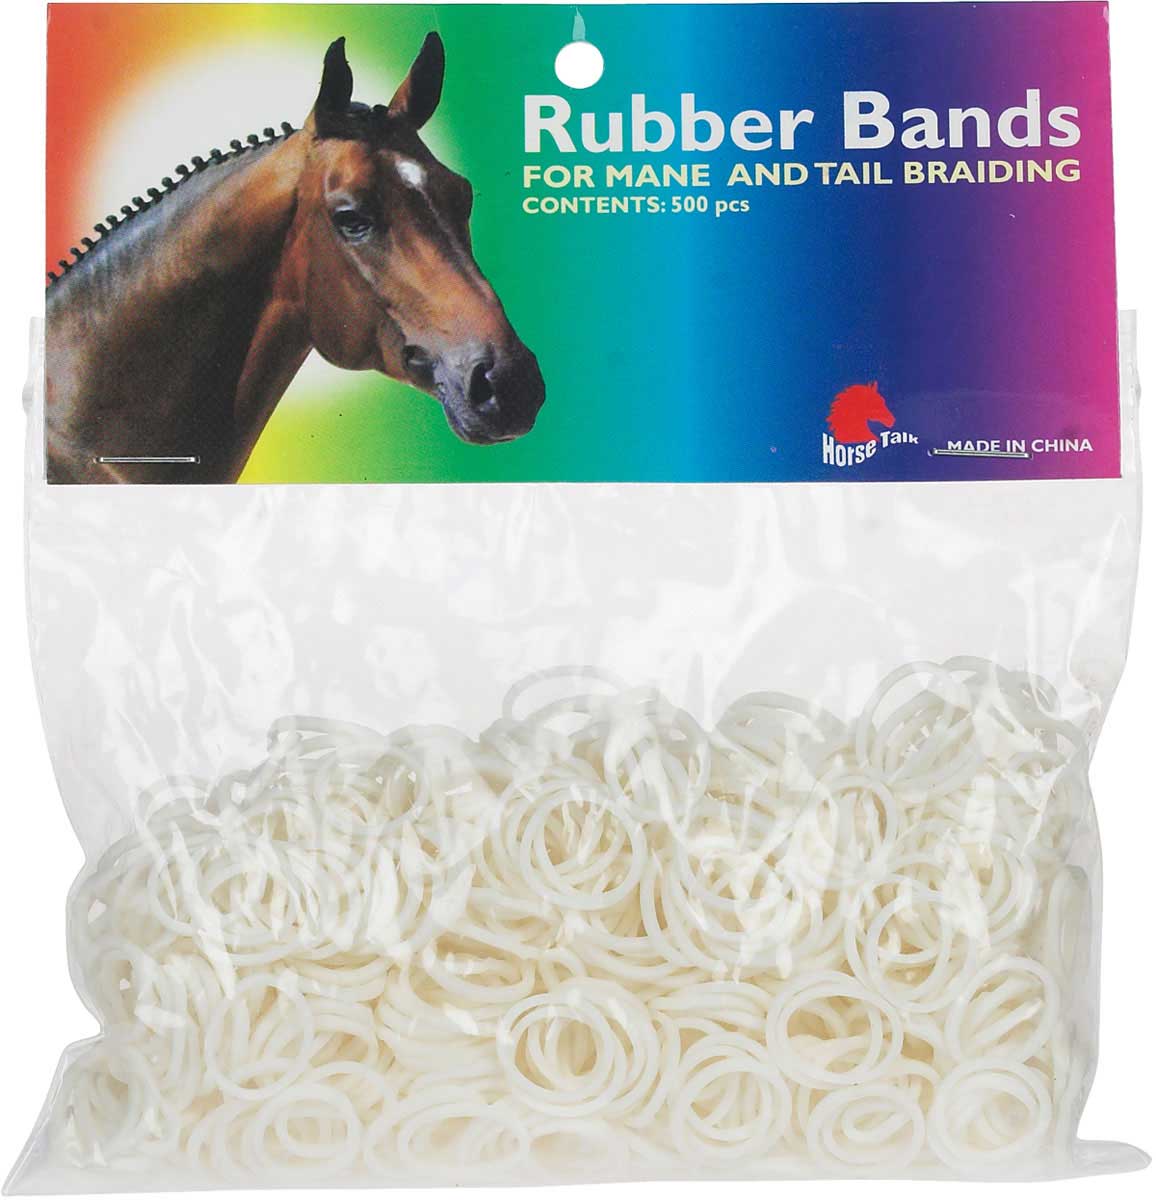 Horse Hair Rubber Bands for Braiding and Banding Super Natural